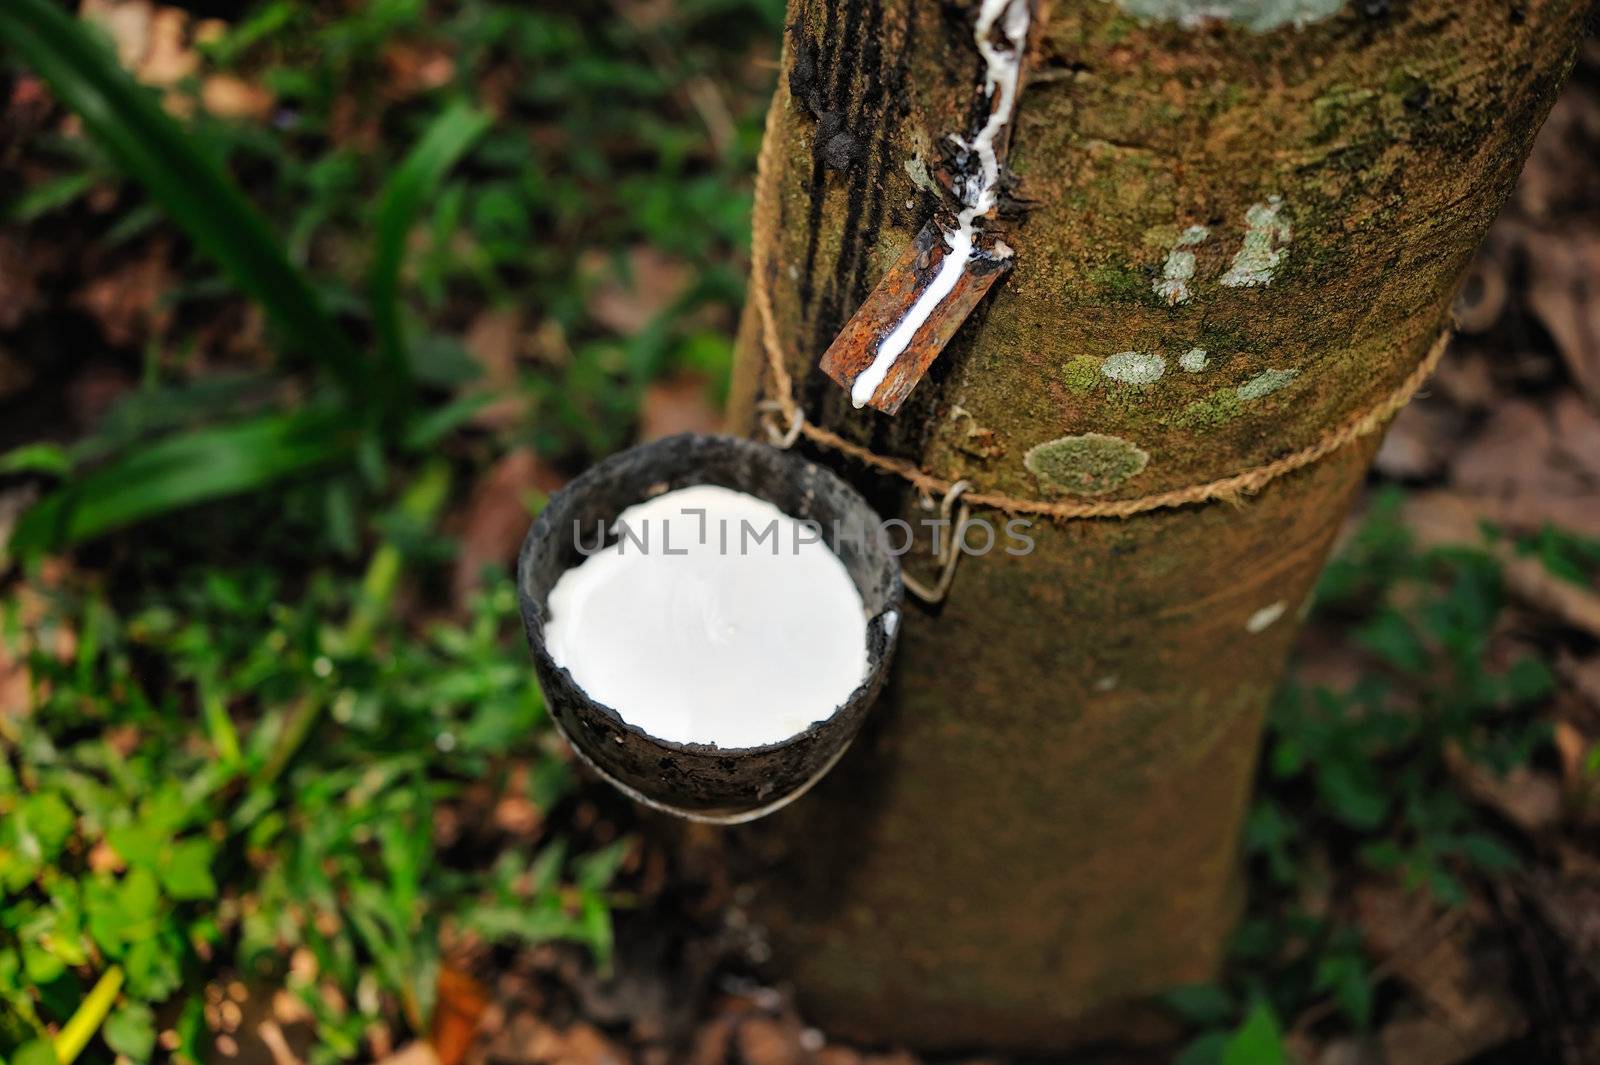 An incision is made in the bark of a rubber tree, to optimise the latex yield